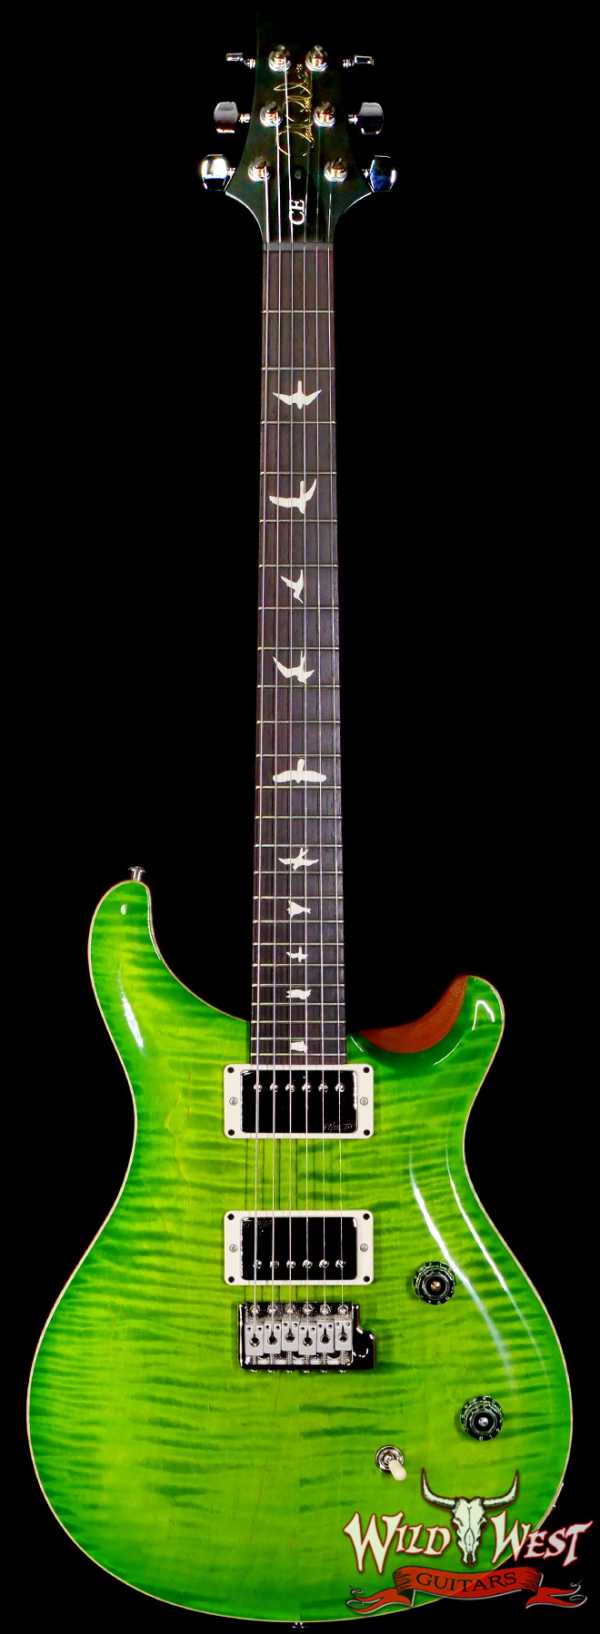 Paul Reed Smith PRS Wild West Guitars Special Run CE 24 Painted Black Neck 57/08 Covered Pickups Eriza Verde 7.55 LBS